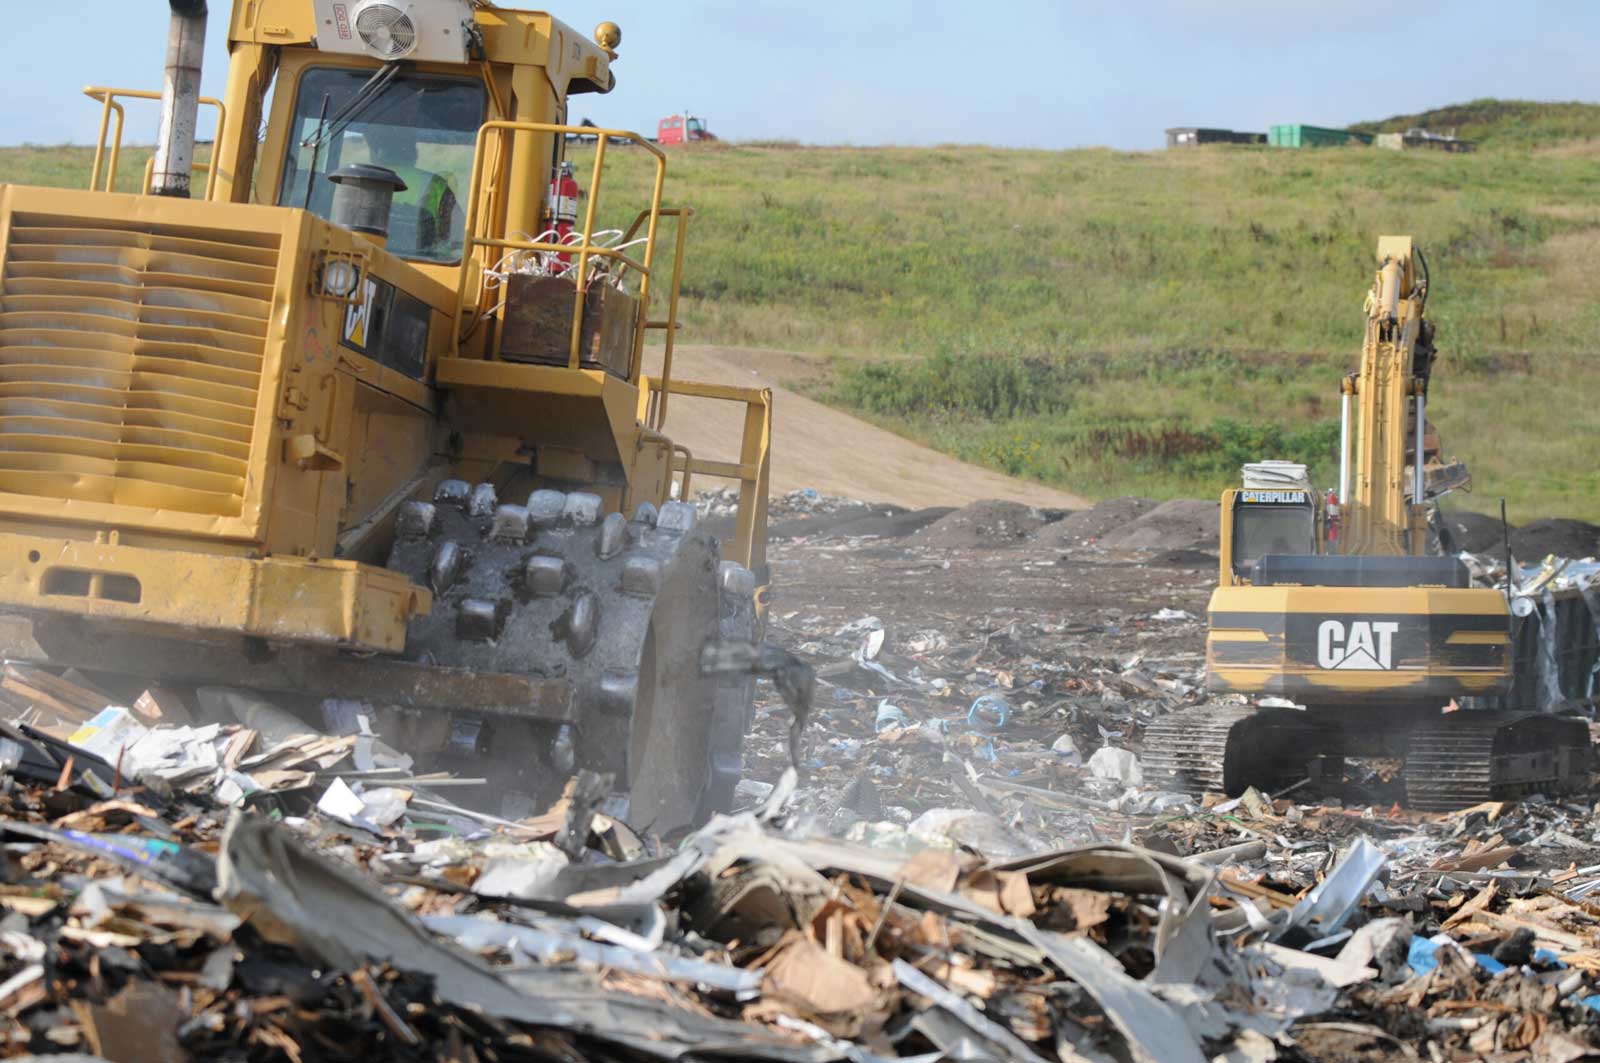 Dem-Con Crew cleans up/moves landfill waste